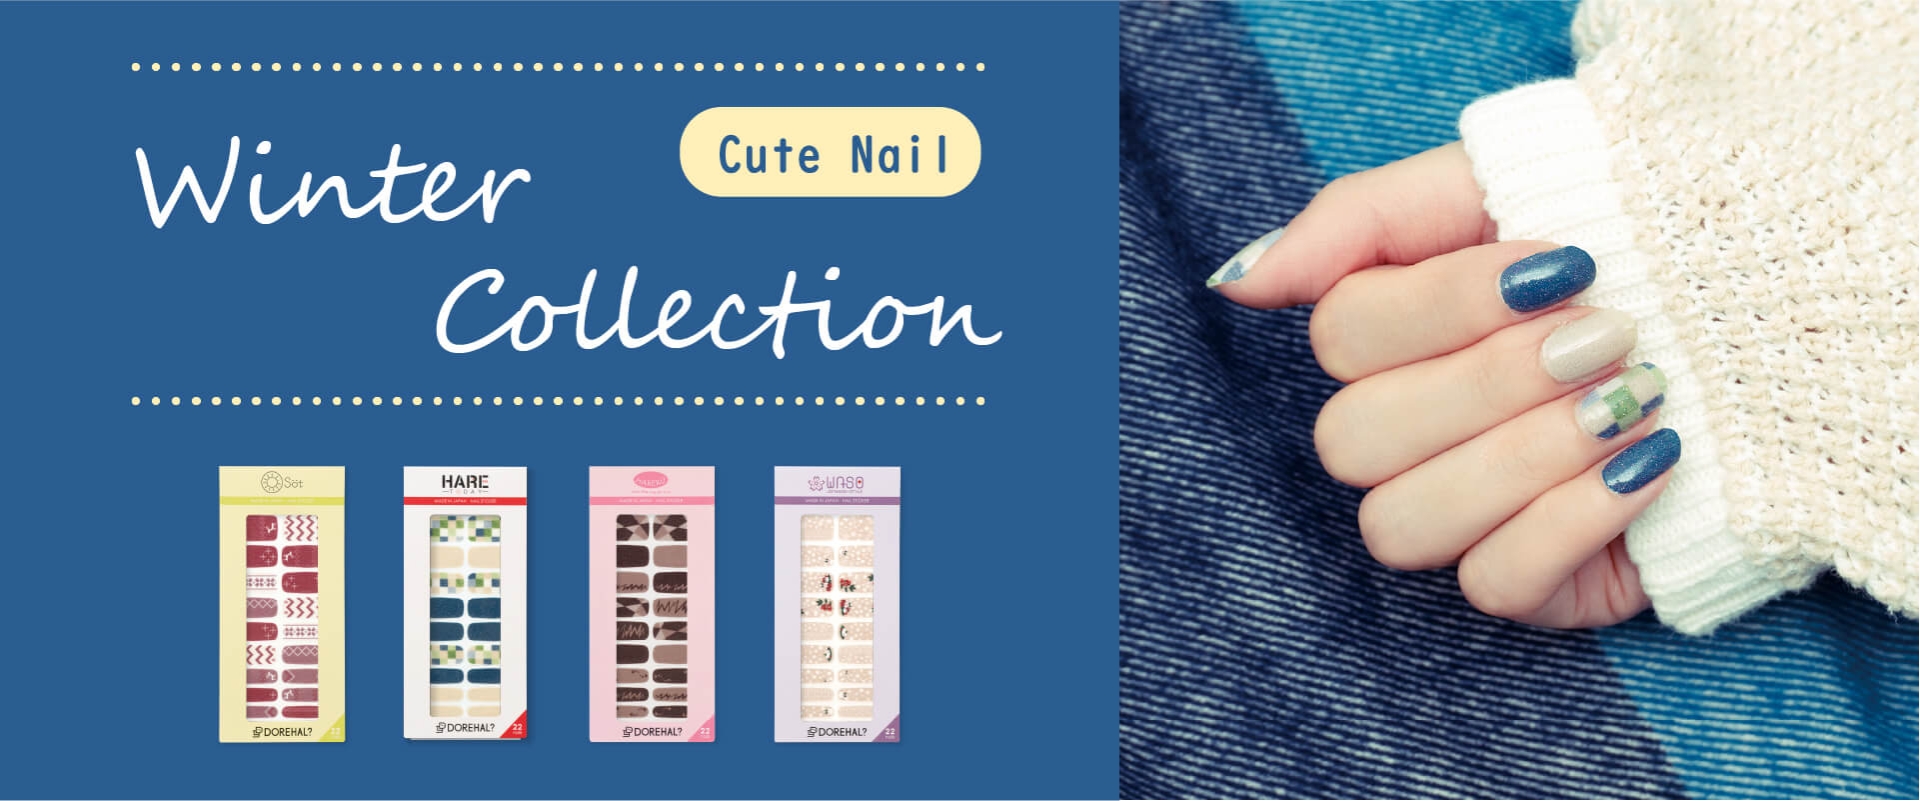 Cute Nail Winter Collection